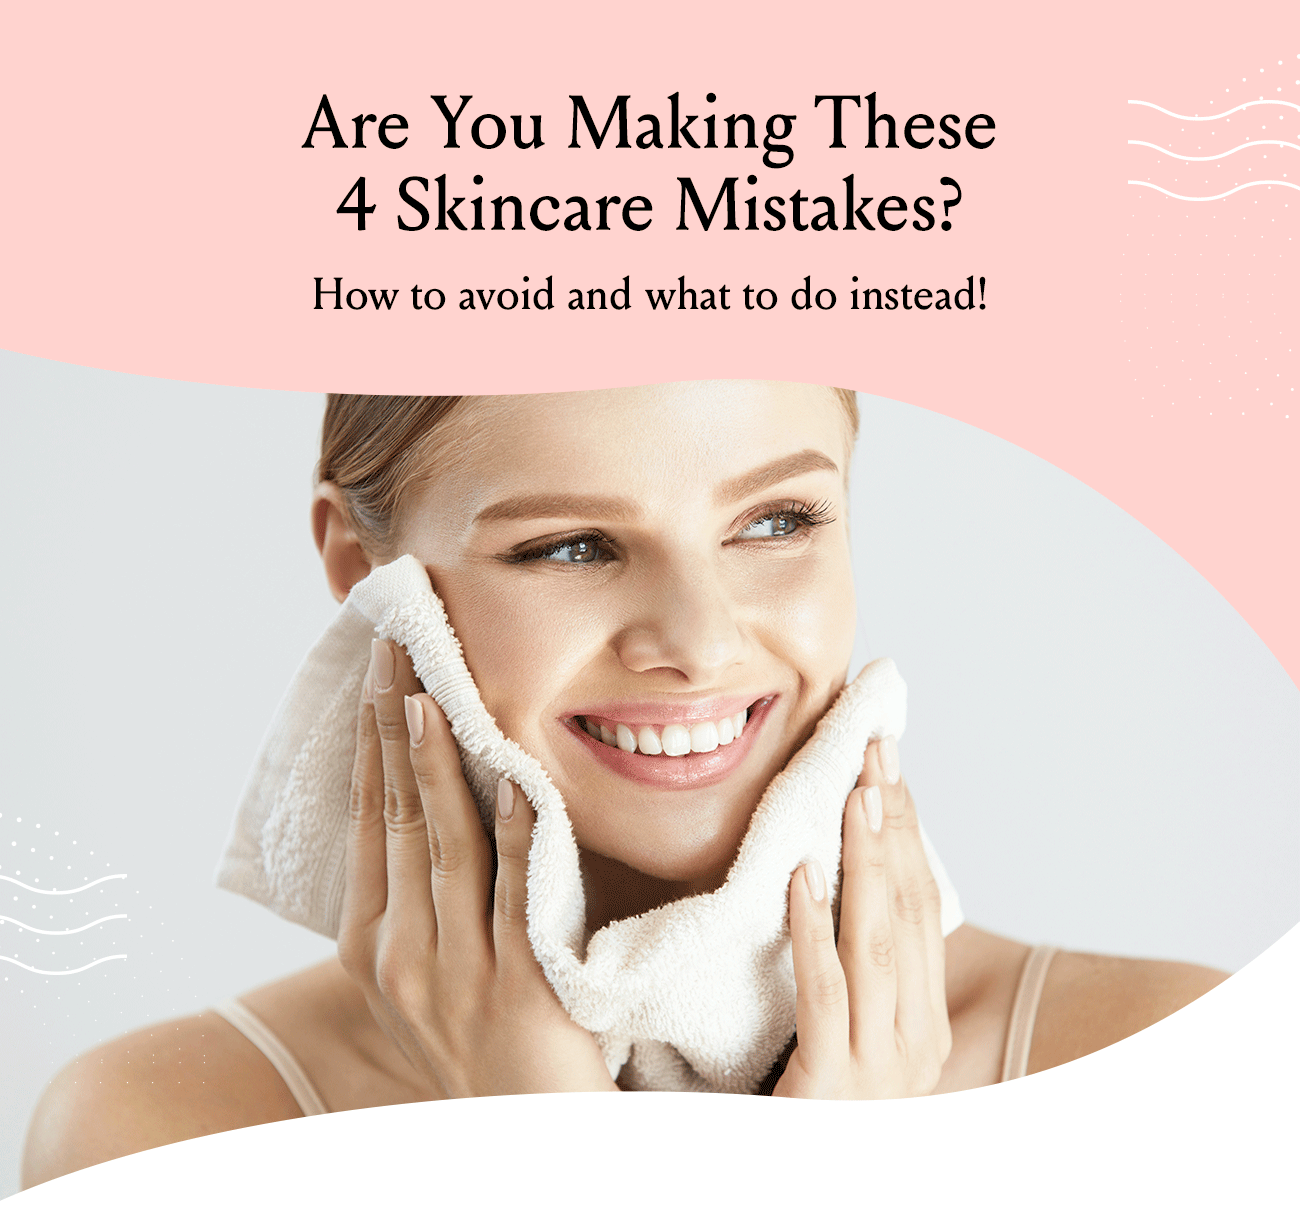 Are You Making These 4 Skincare Mistakes?